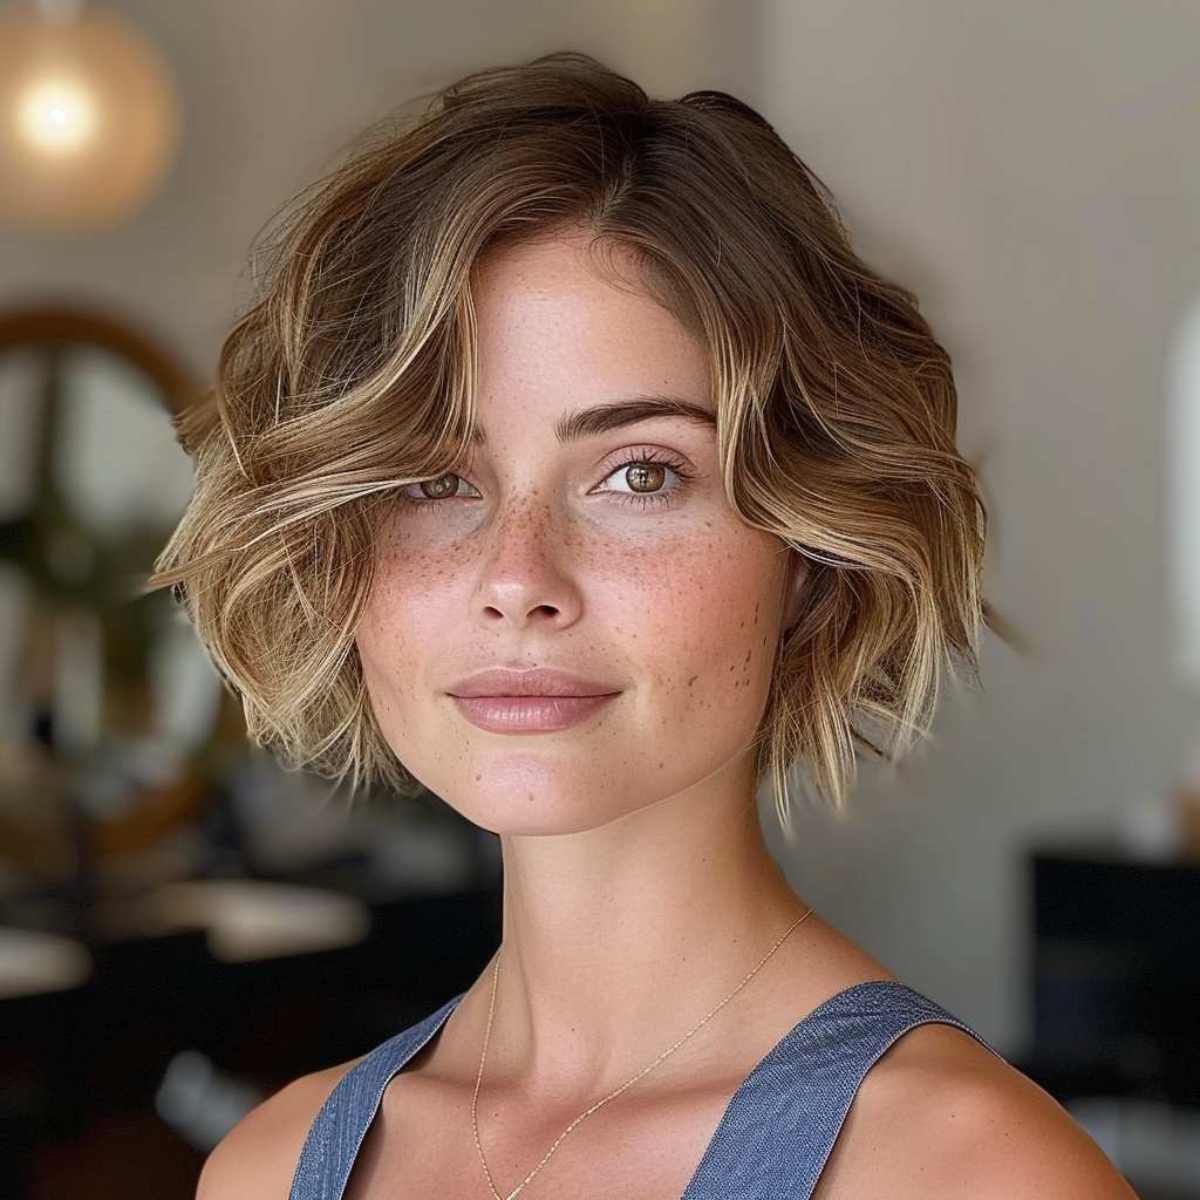 Stylish Short Haircuts for Thin Hair to Add Volume and Texture